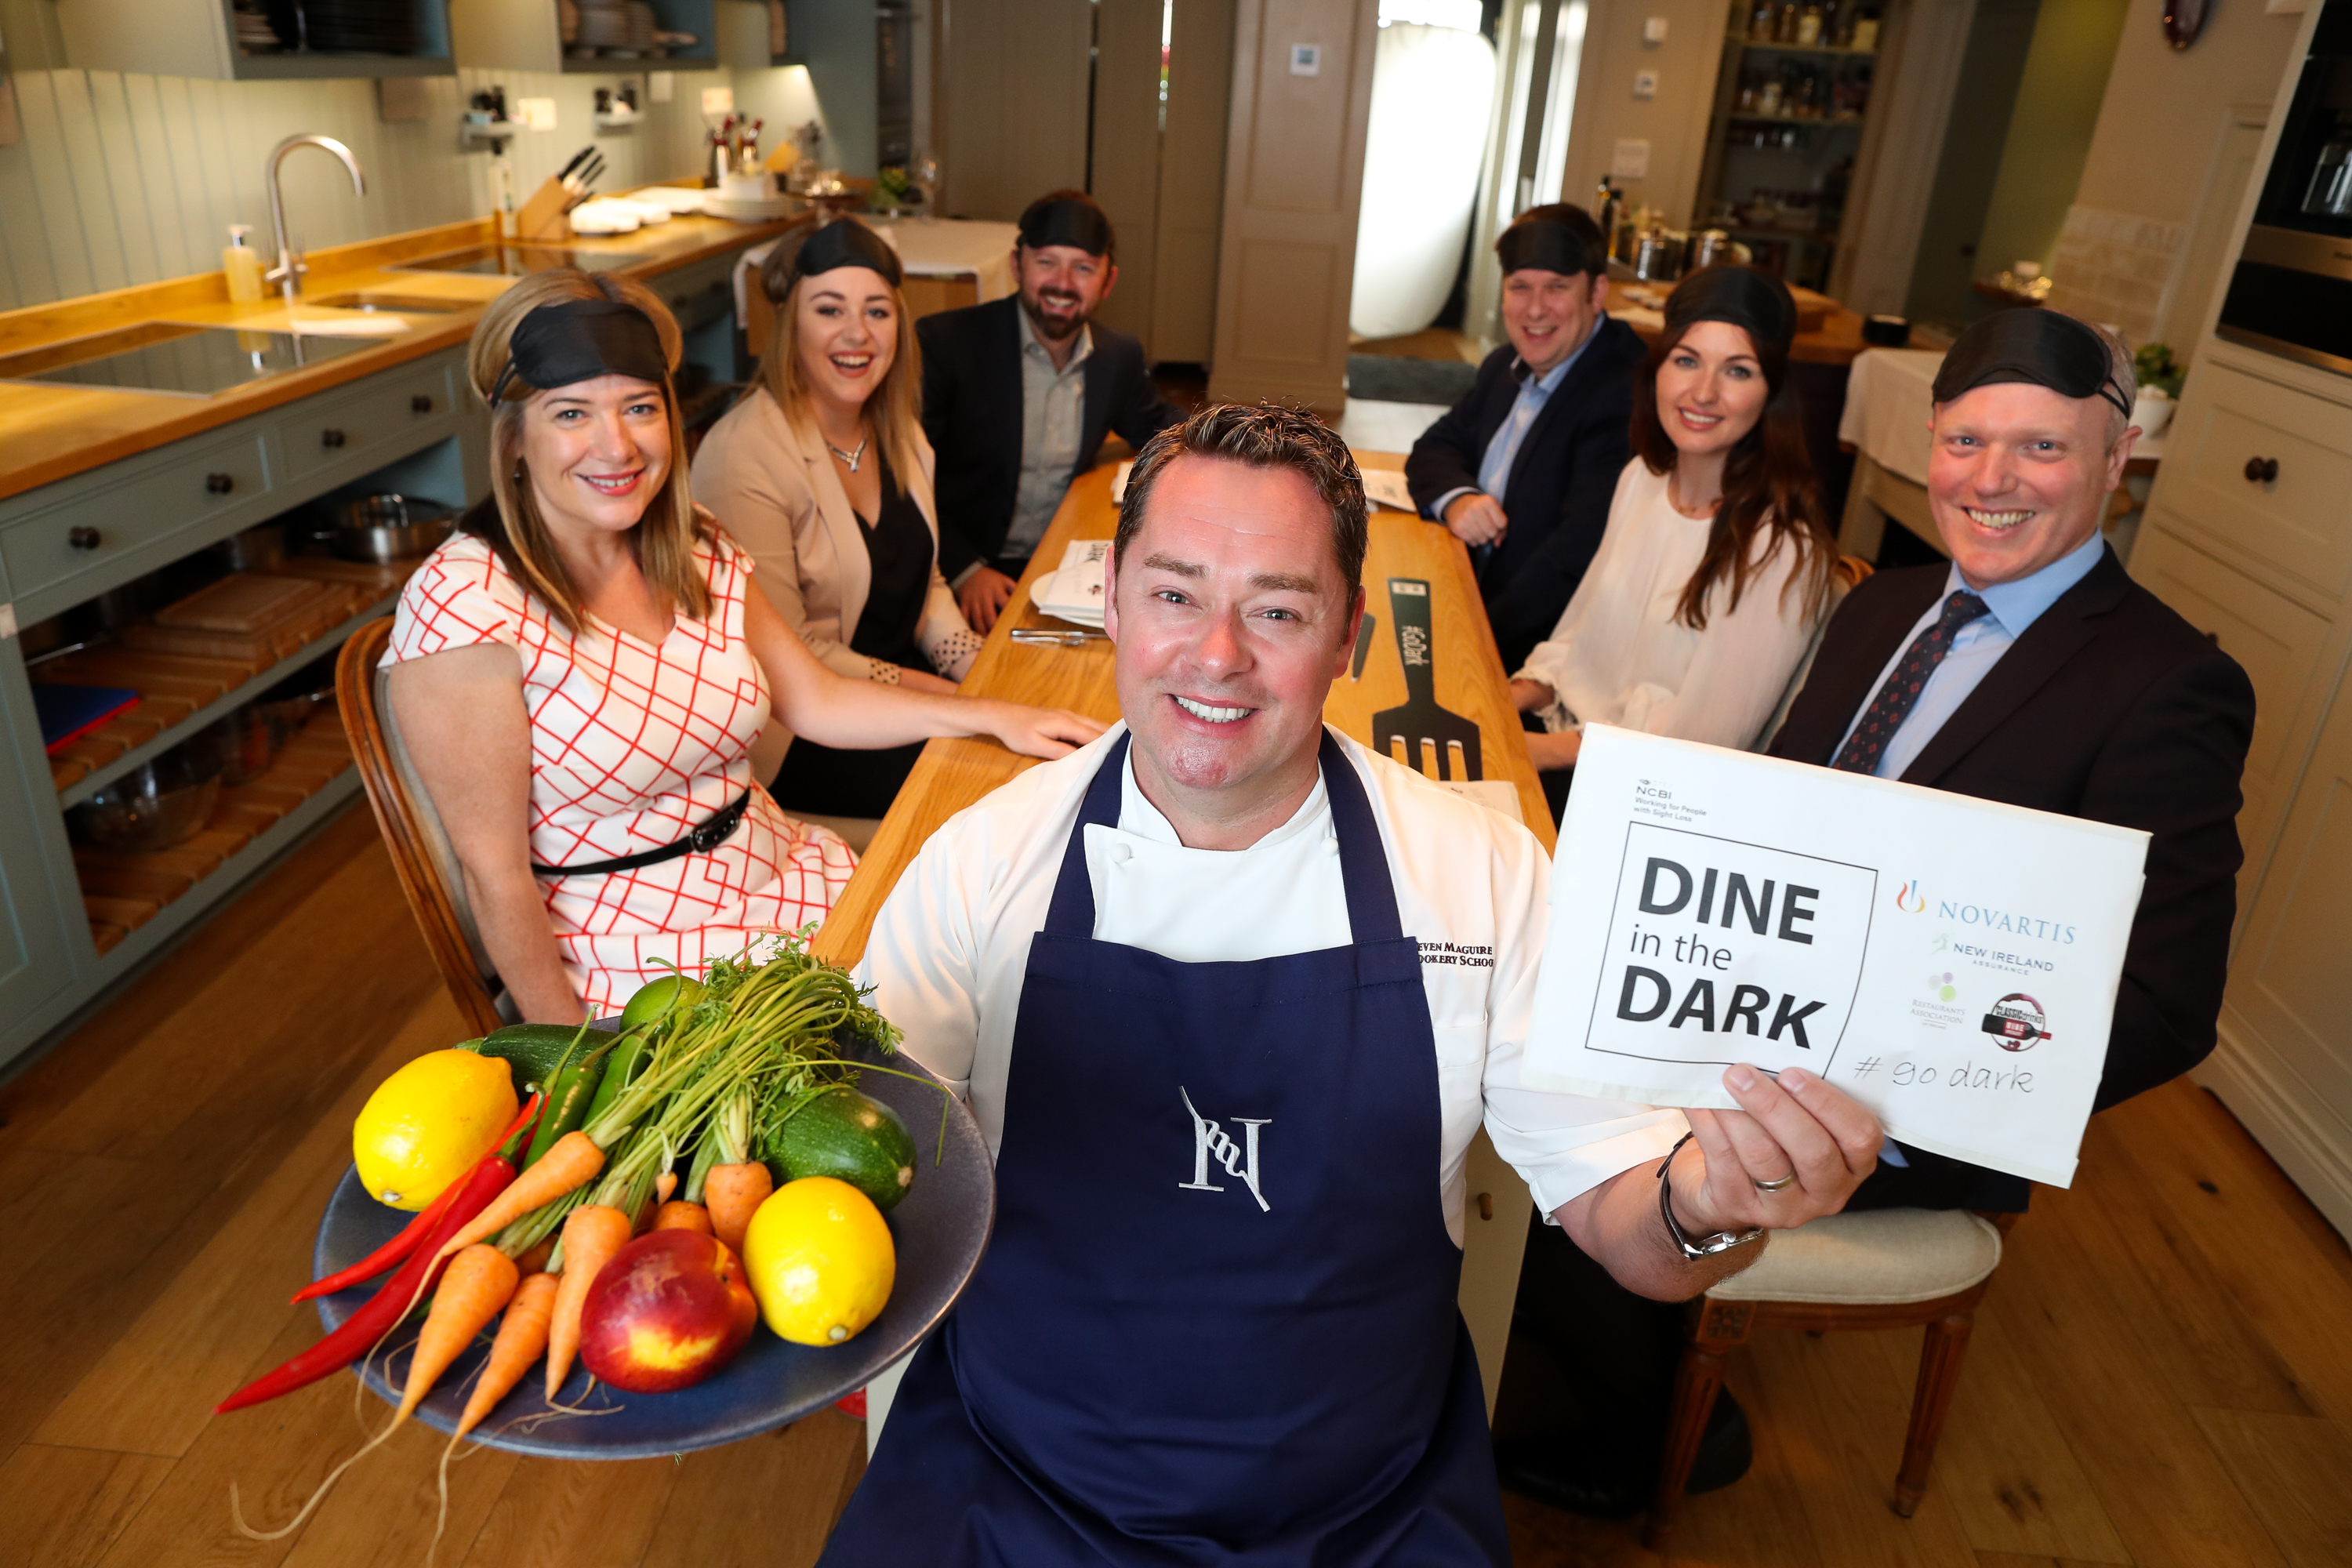 National Council for the Blind Challenge Restaurants to Dine in the Dark